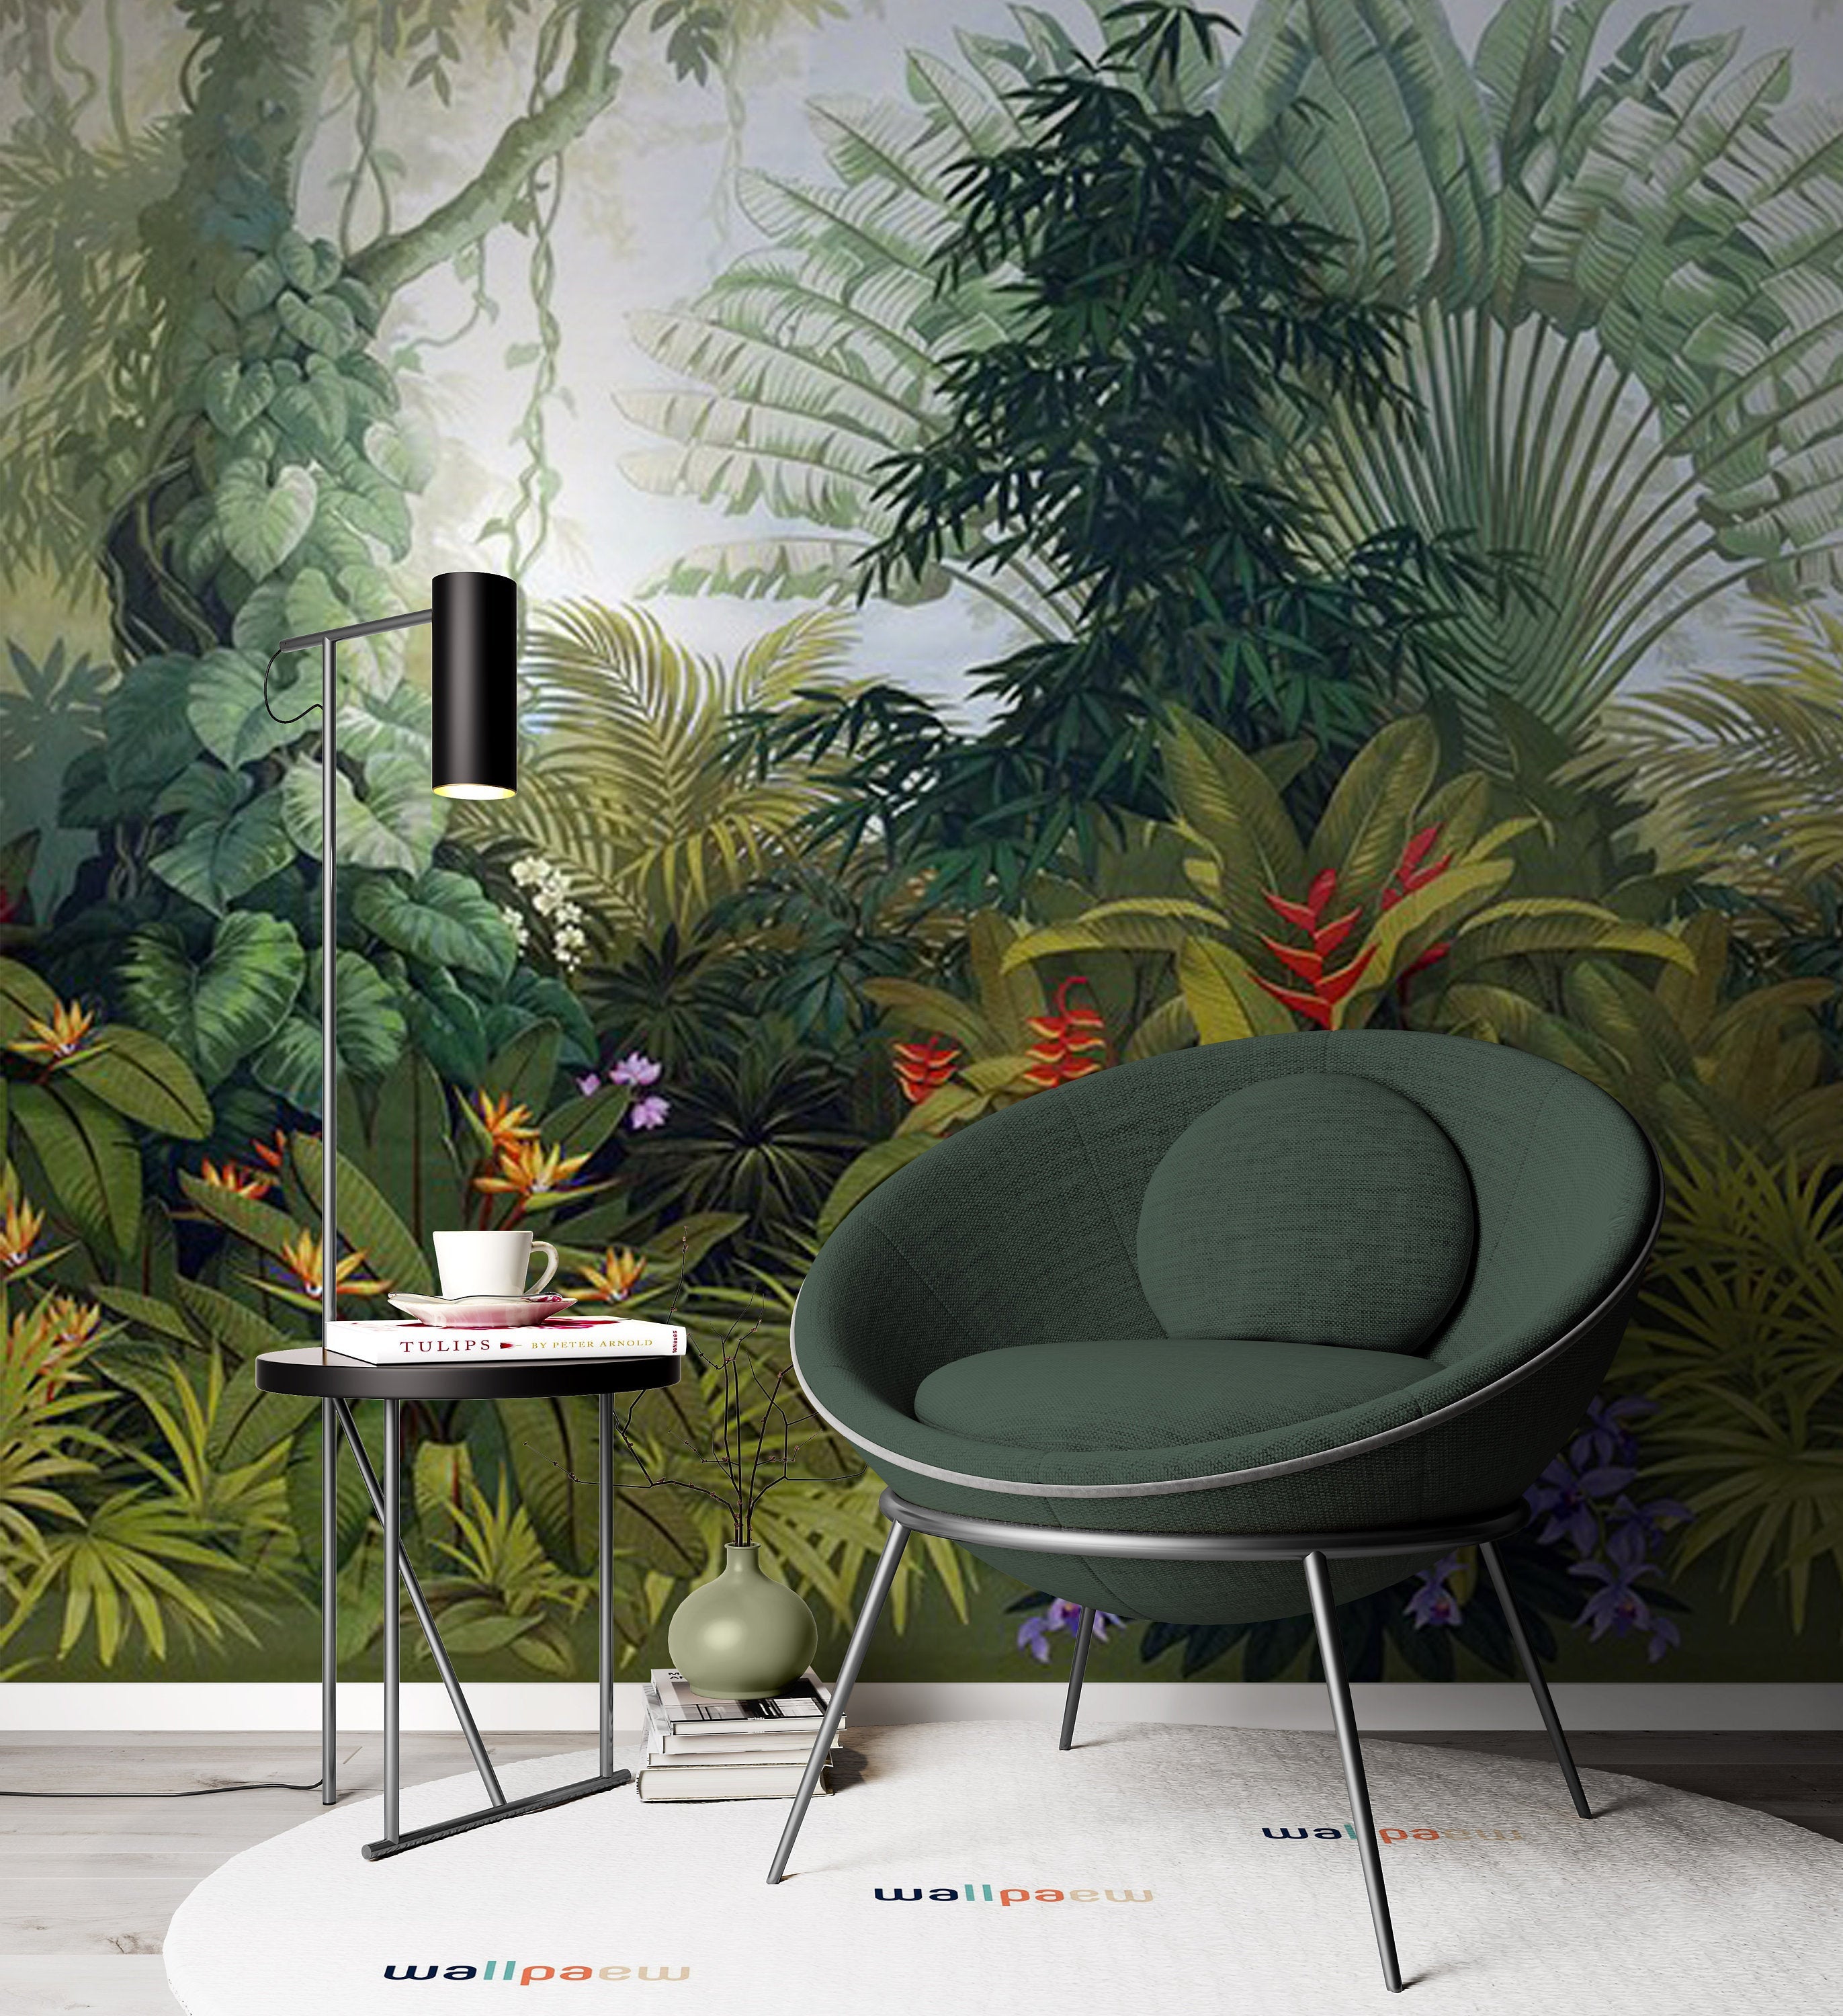 Vivid Colored Tropical Jungle Plants Wallpaper Self Adhesive Peel and Stick Wall Sticker Wall Decoration Scandinavian Removable